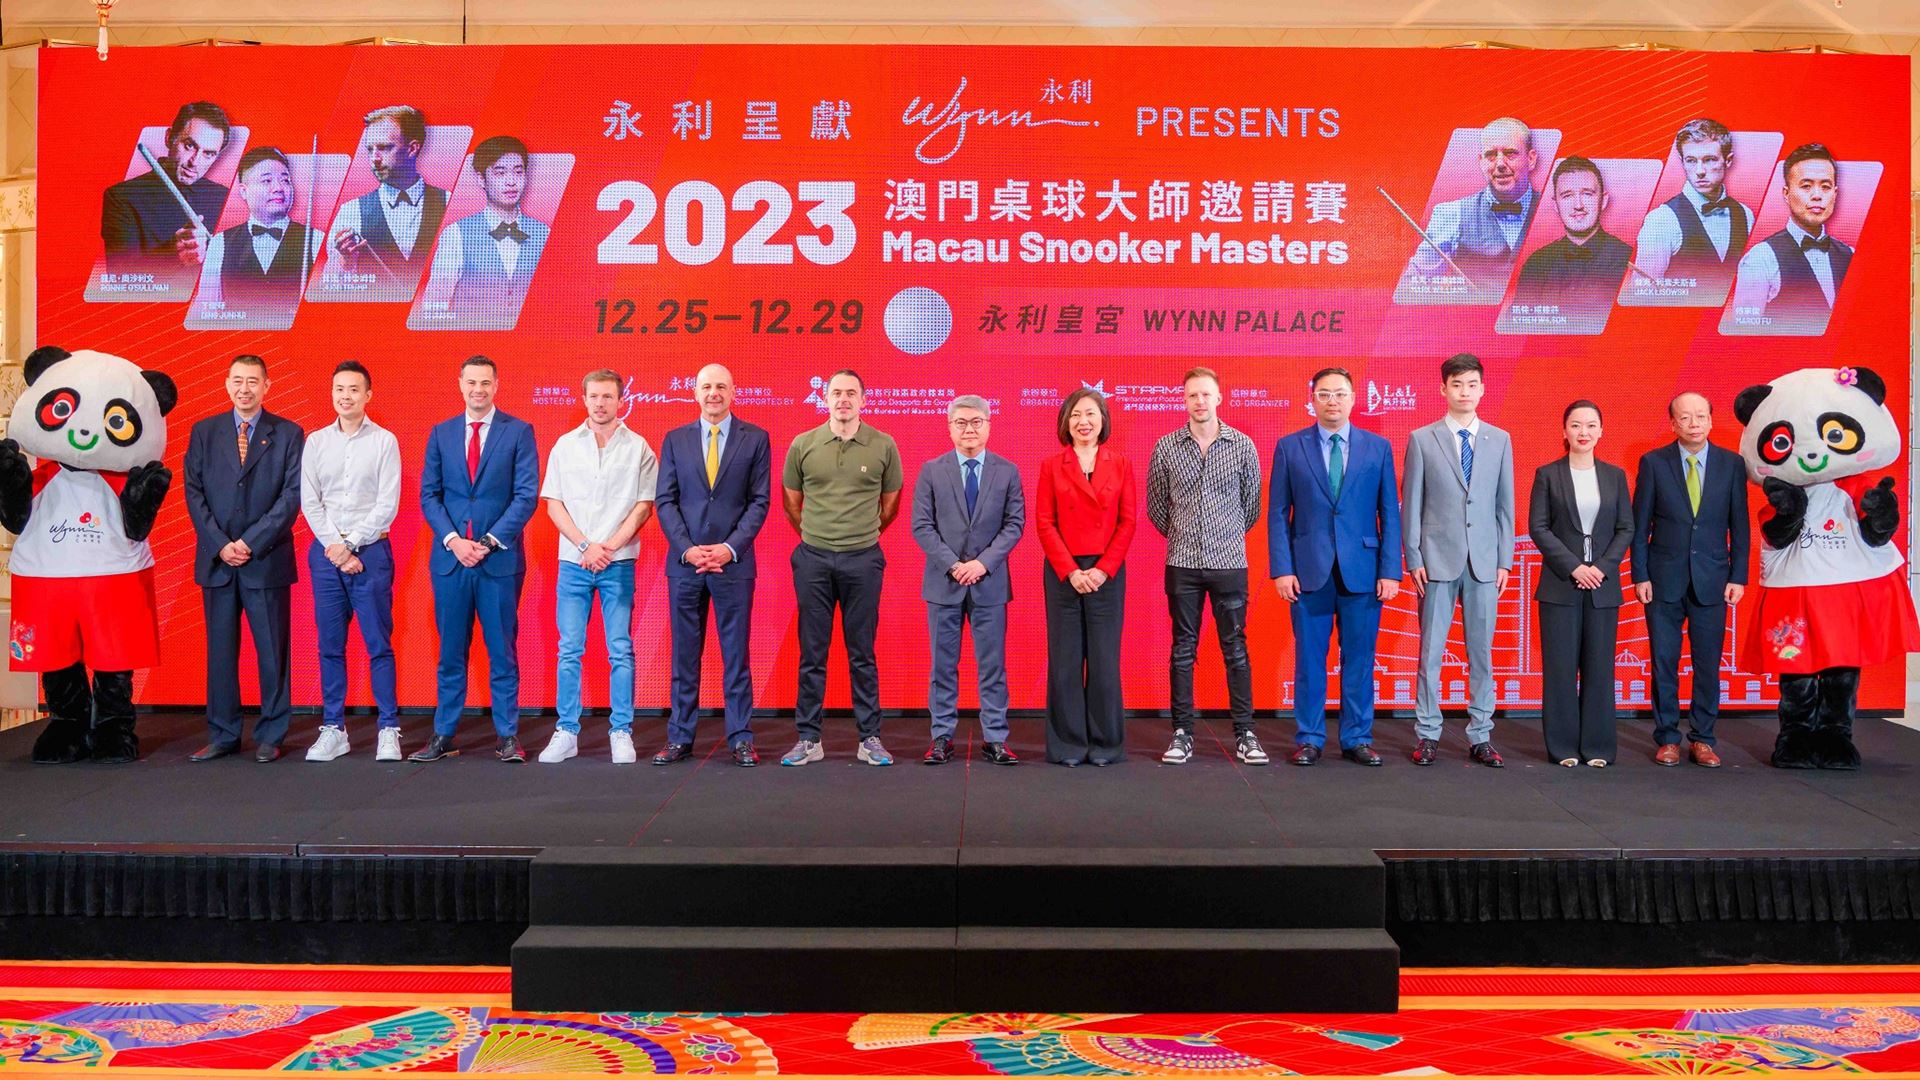 The highly-anticipated "Wynn Presents - 2023 Macau Snooker Masters" event was announced at a press conference...